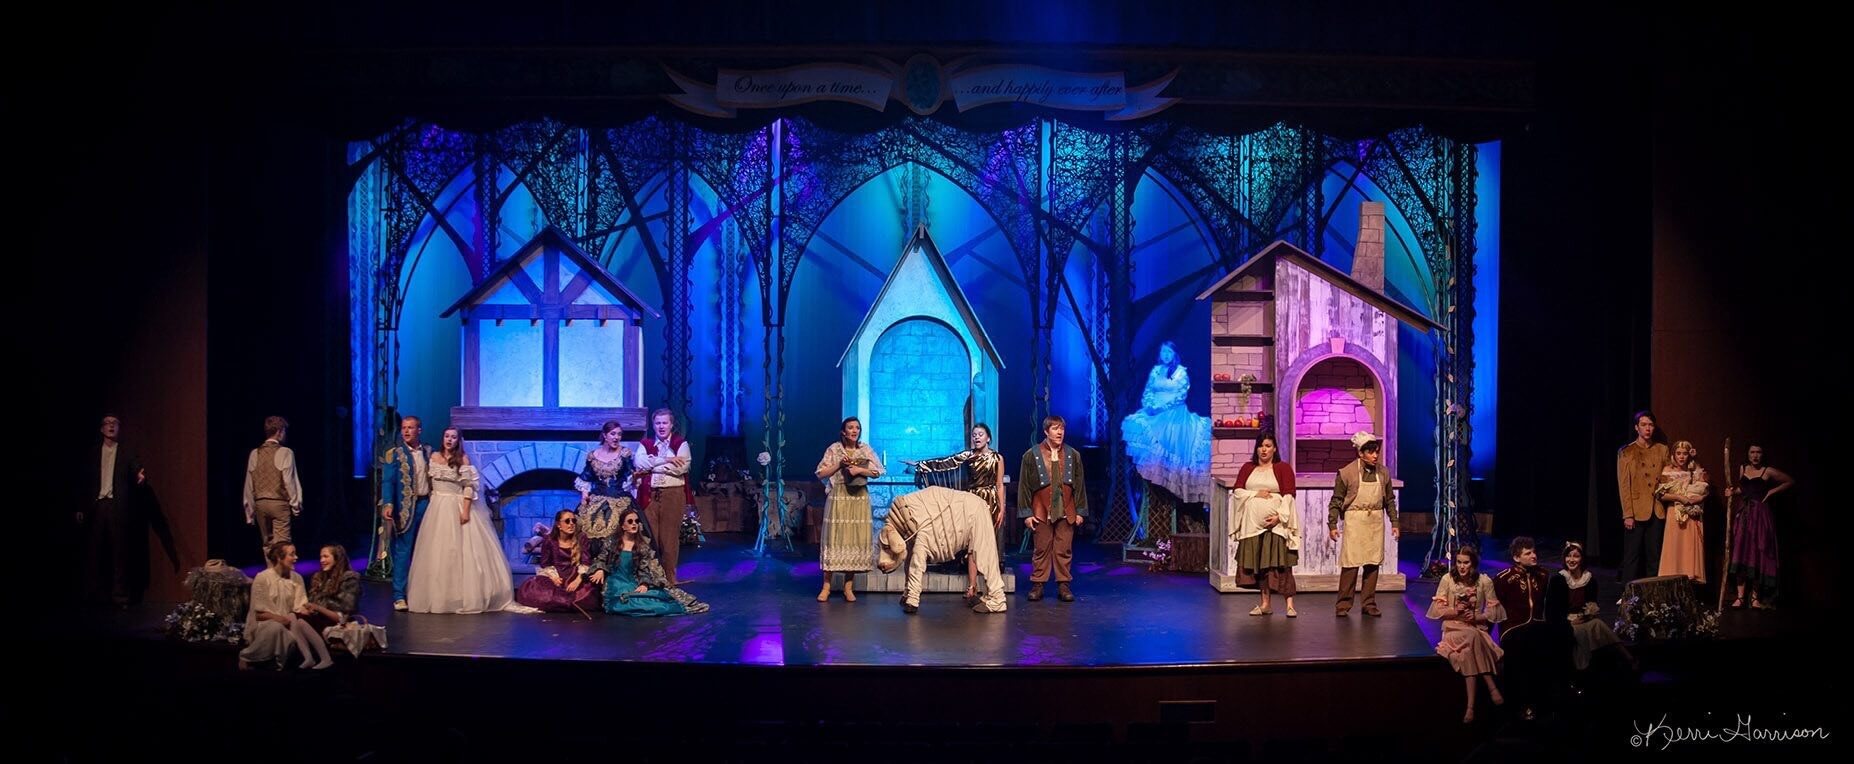 Into the Woods Set Rental pictures - Stagecraft Theatrical